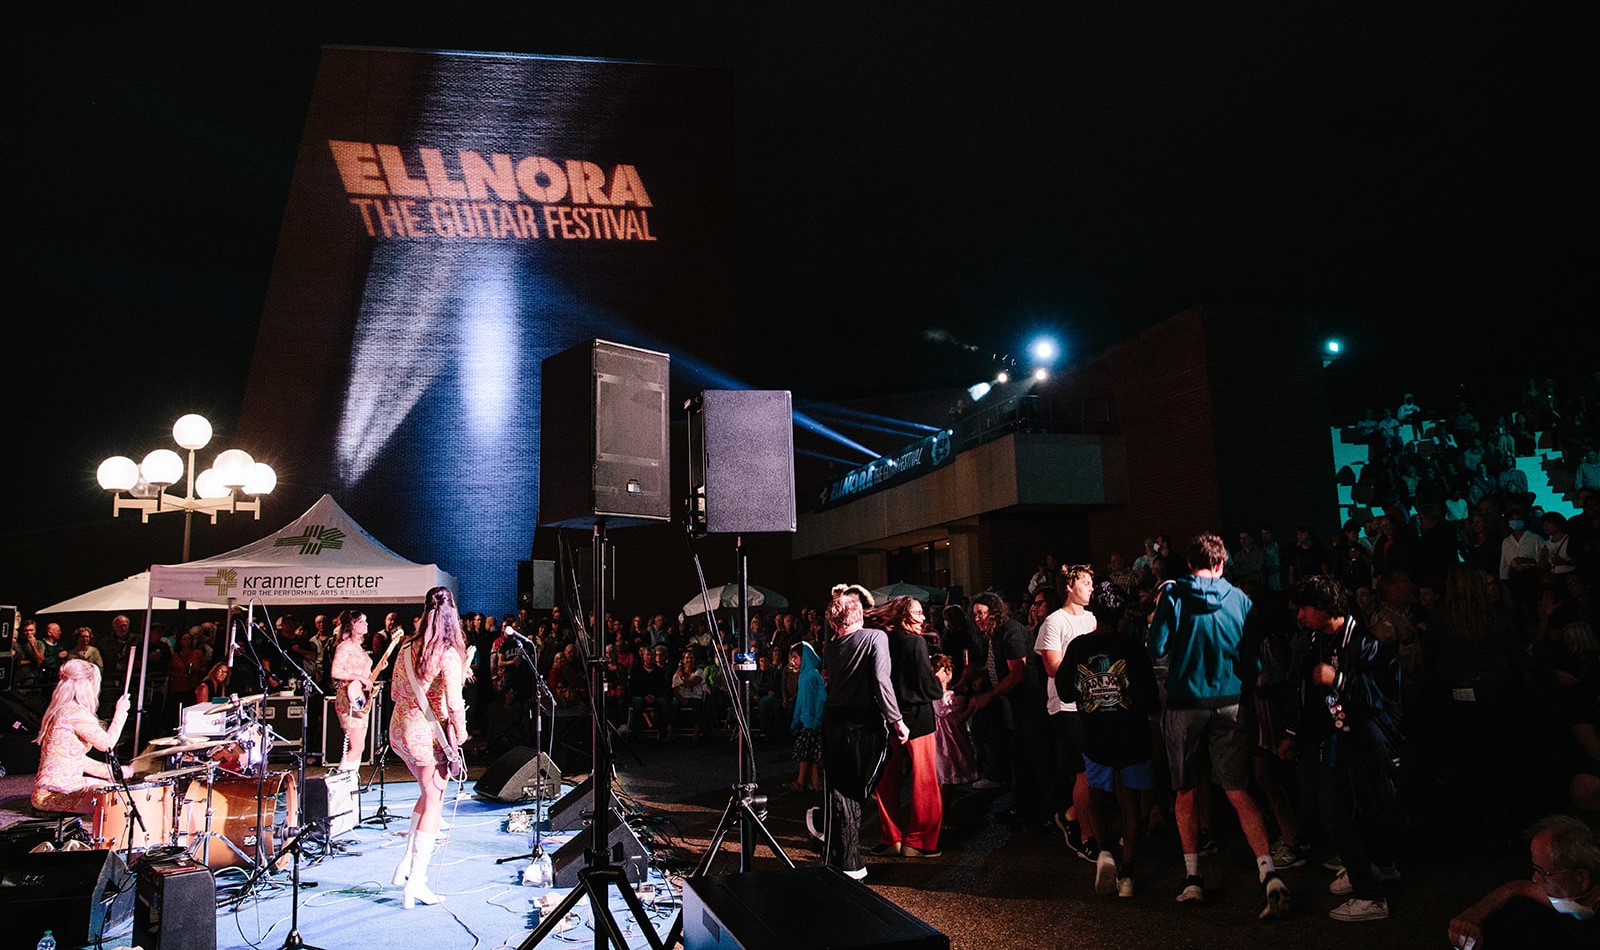 An all woman band plays on a stage in an outdoor ampitheatre. ELLNORA is projected onto the adjacent building.